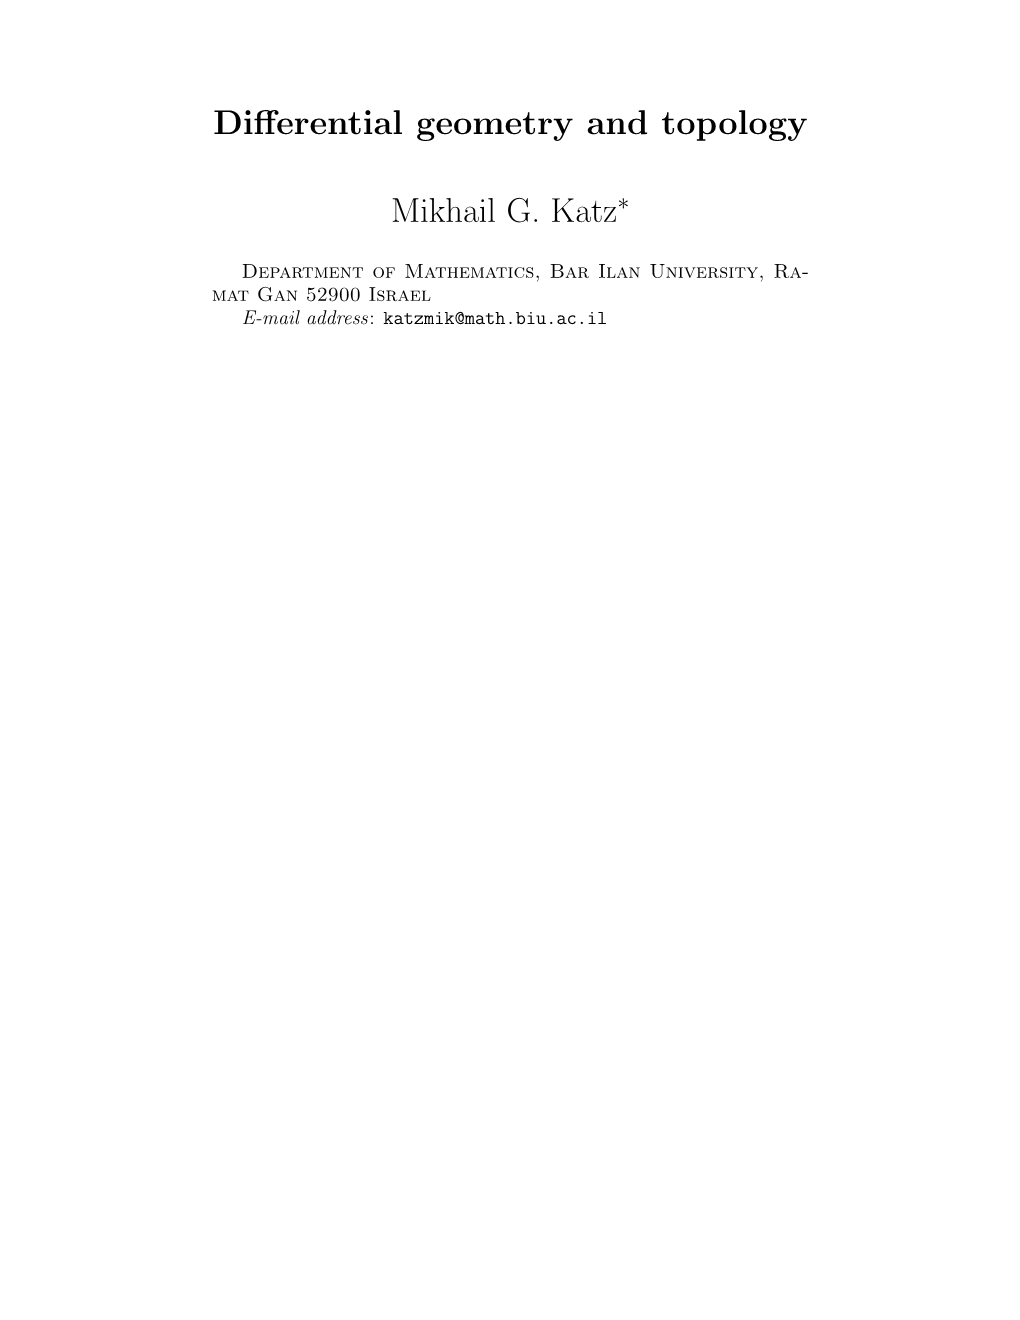 Differential Geometry and Topology Mikhail G. Katz∗